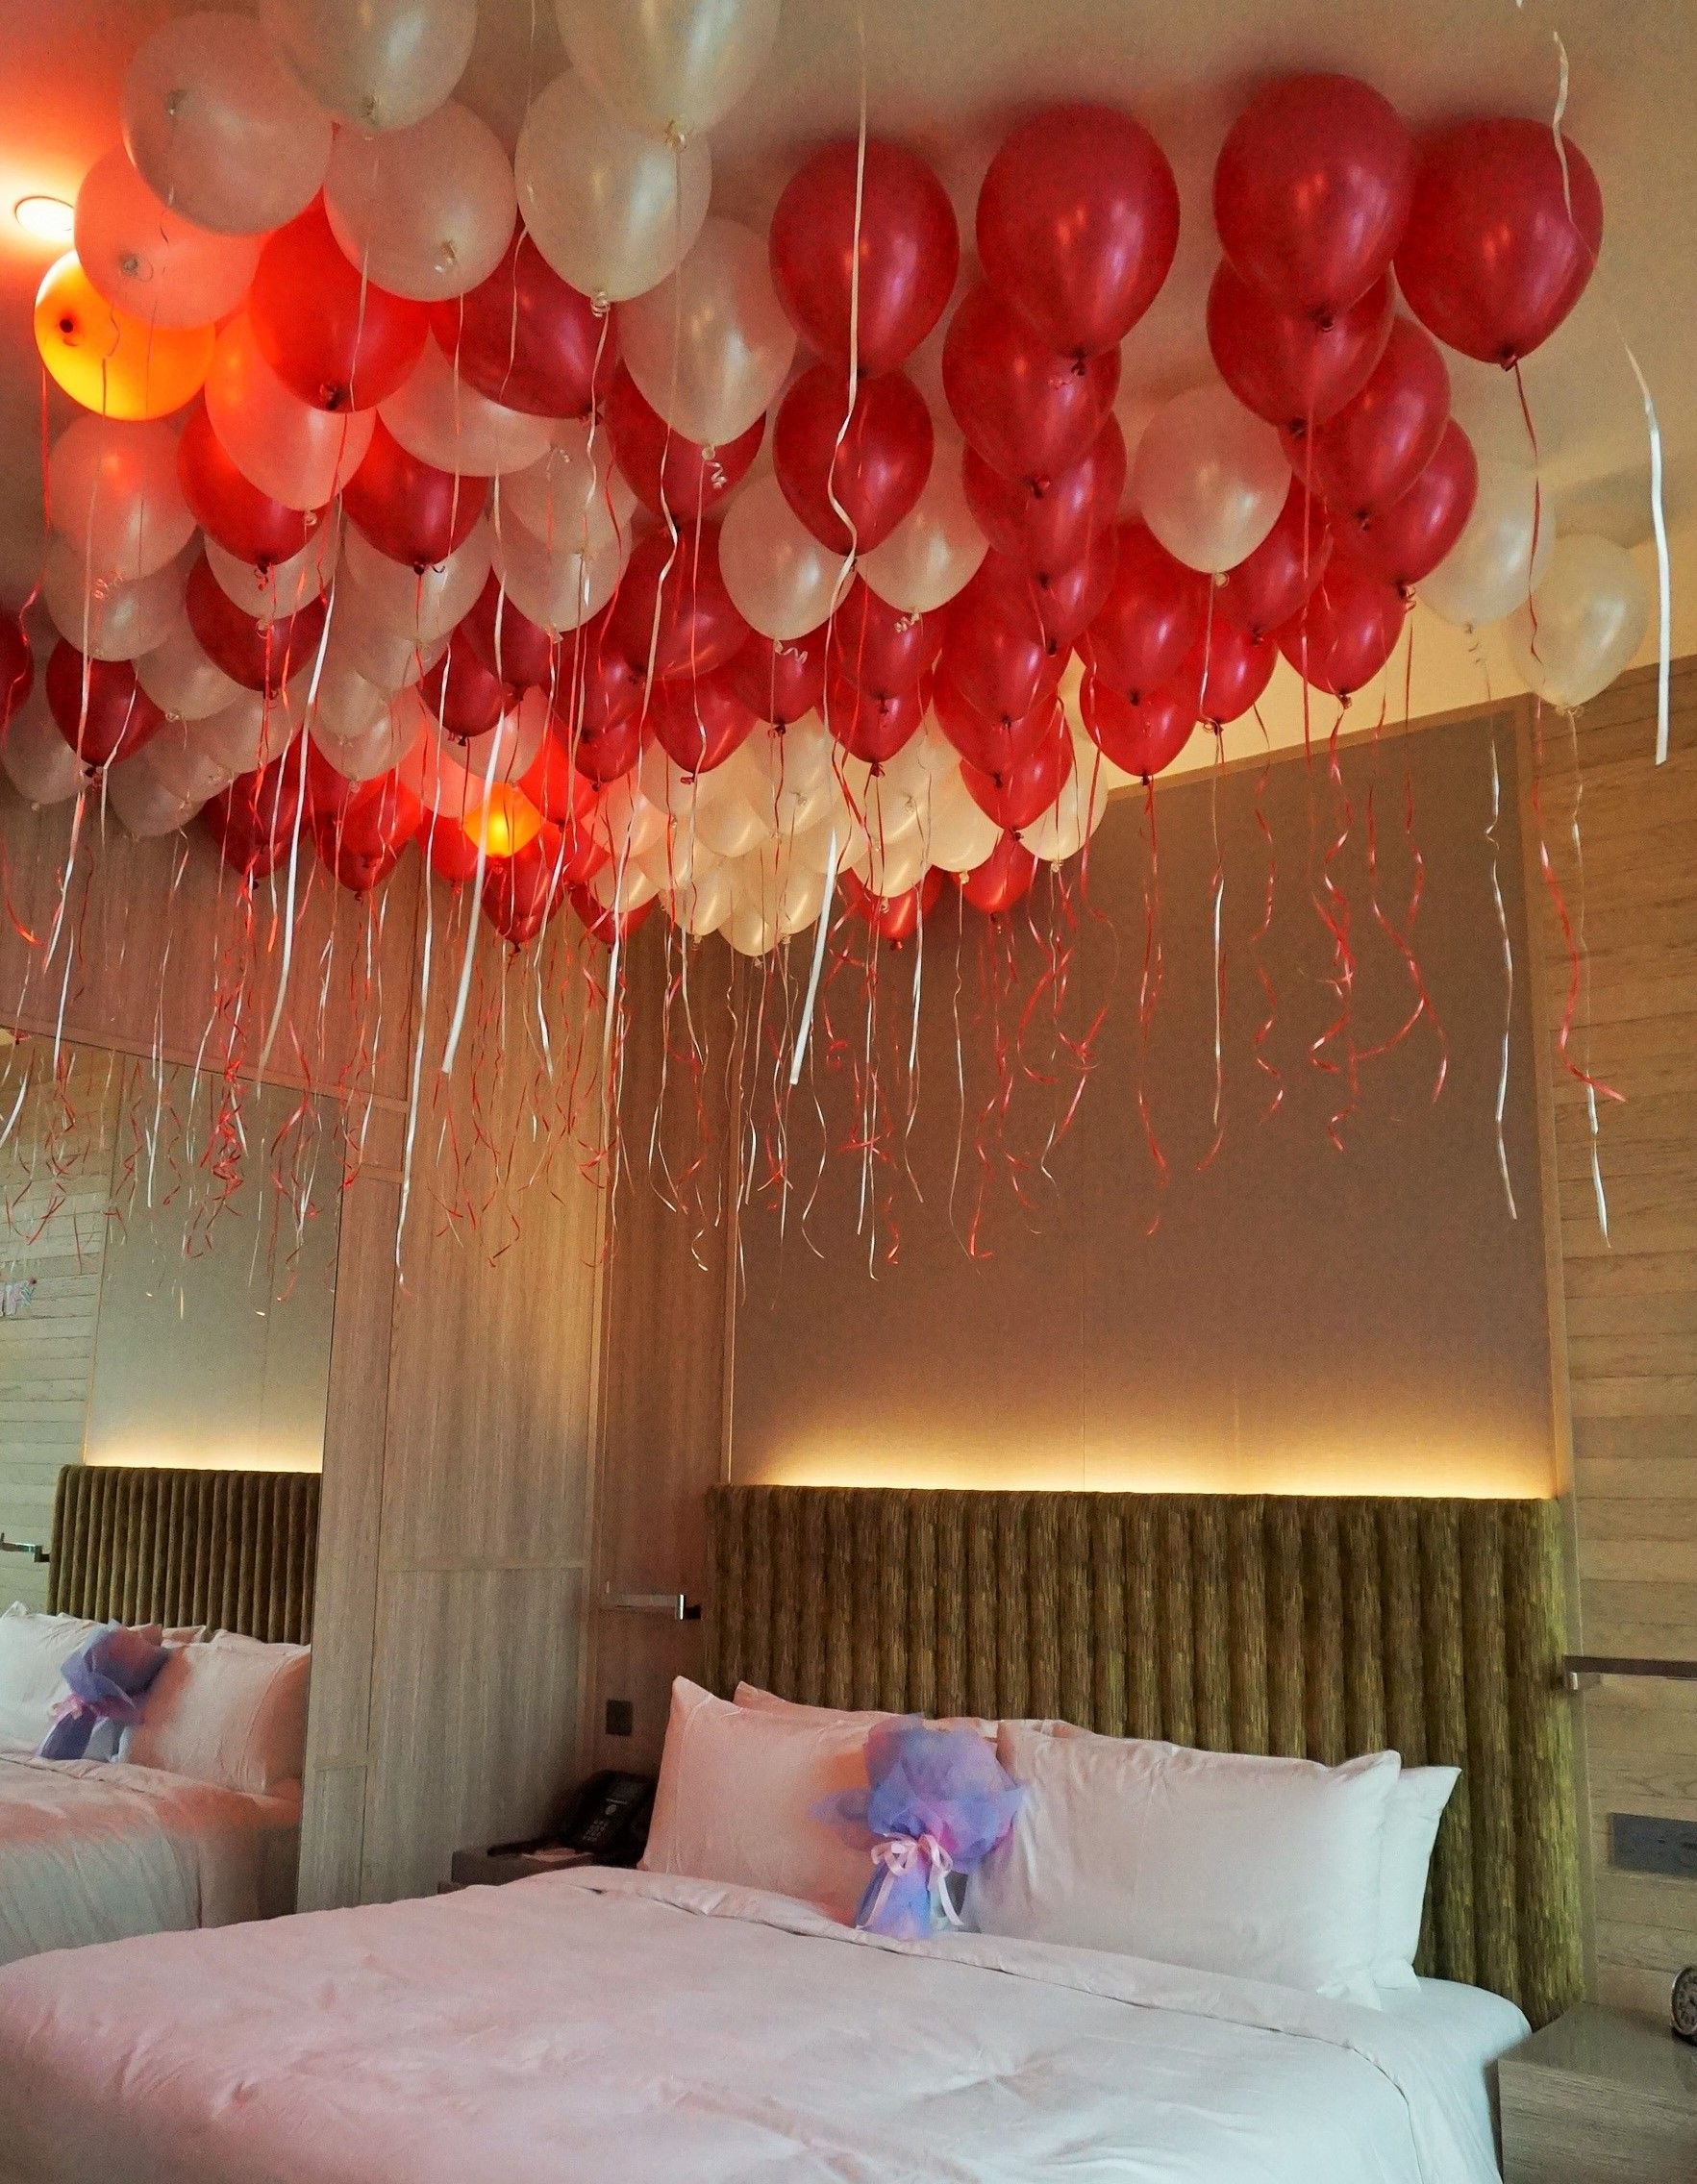  Romantic  Gesture with Flowers Balloons 